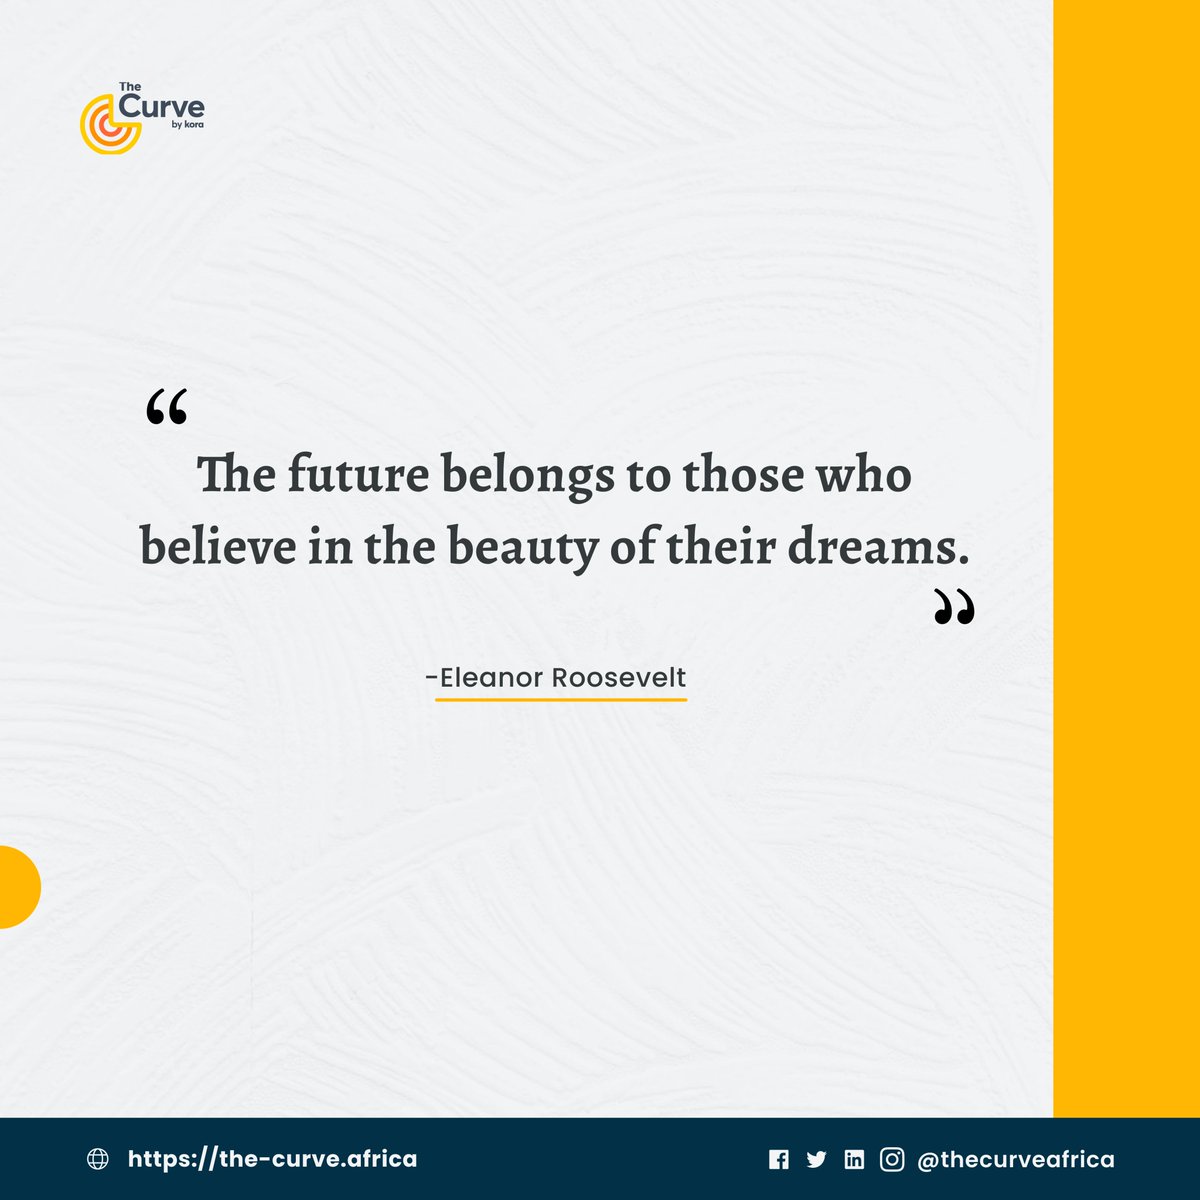 Inspiring words serve as a gentle nudge to explore the potential within our dreams. Together, let's spark our creativity and pursue those glowing aspirations with unwavering faith. 

#thecurveafrica #thecurveafricabykora #africa #impact #softwaredeveloper #tech #tagafriend